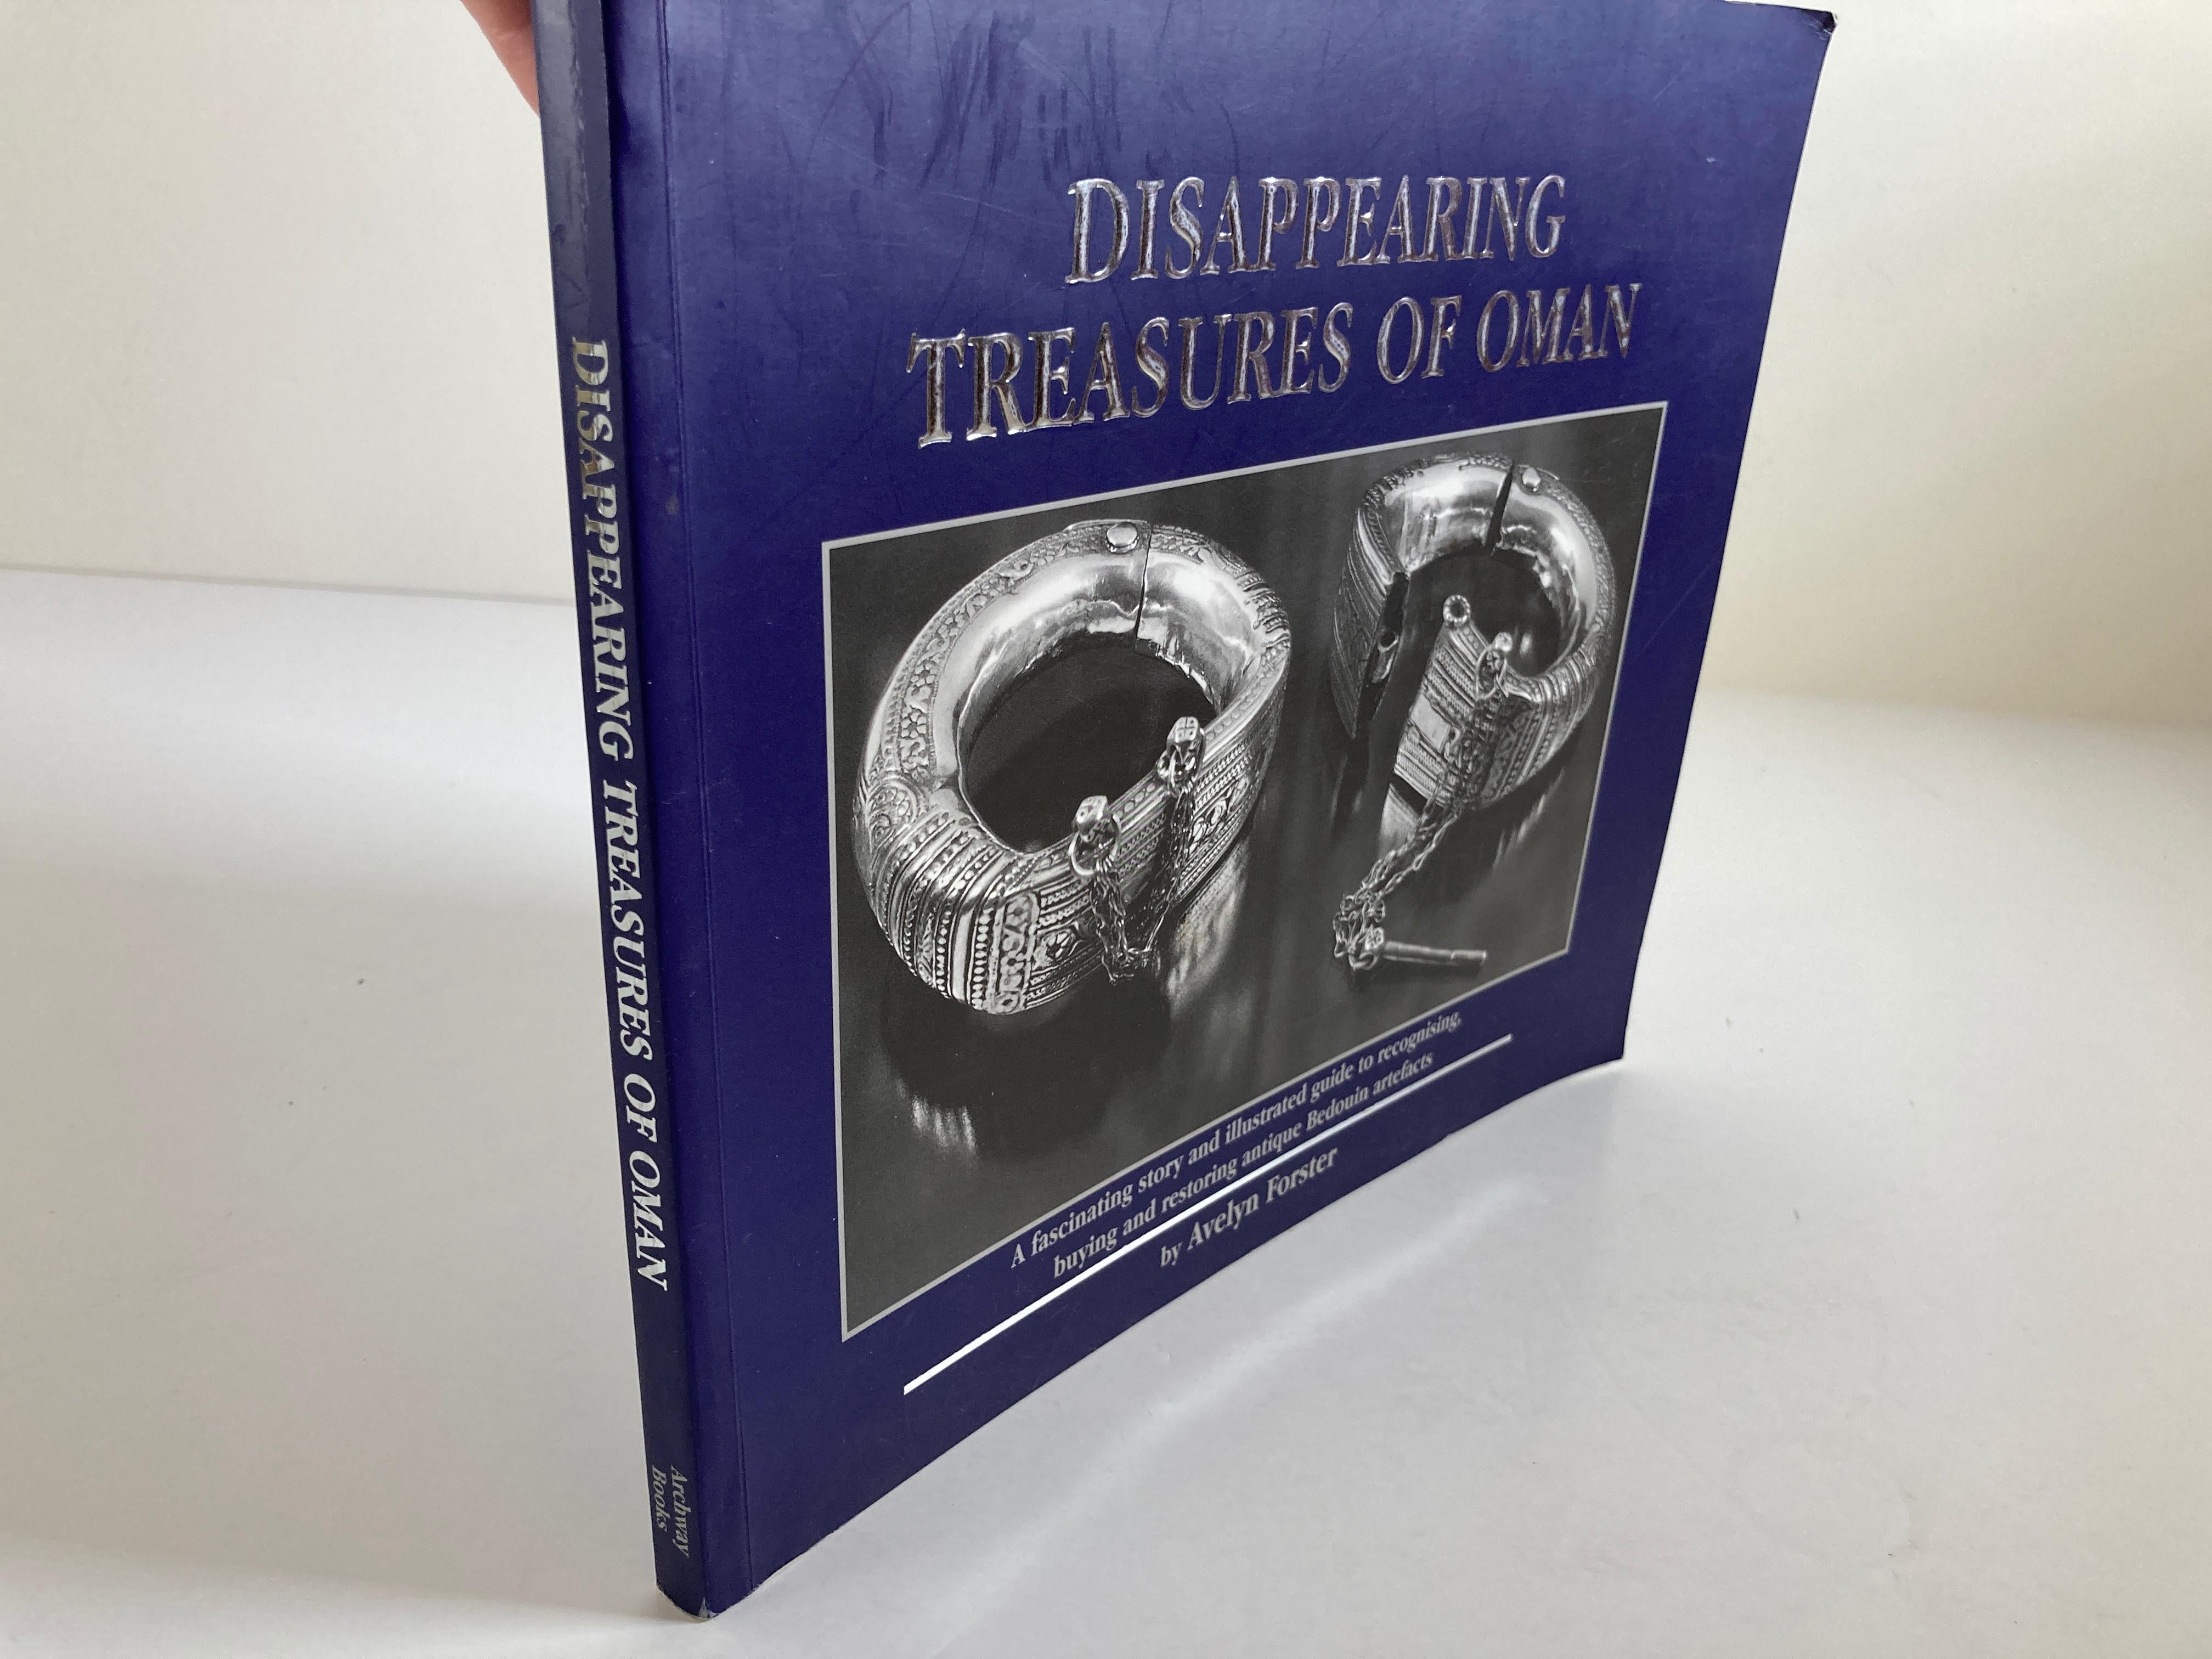 Disappearing Treasures of Oman, Buch von Avelyn Forster (Islamisch) im Angebot